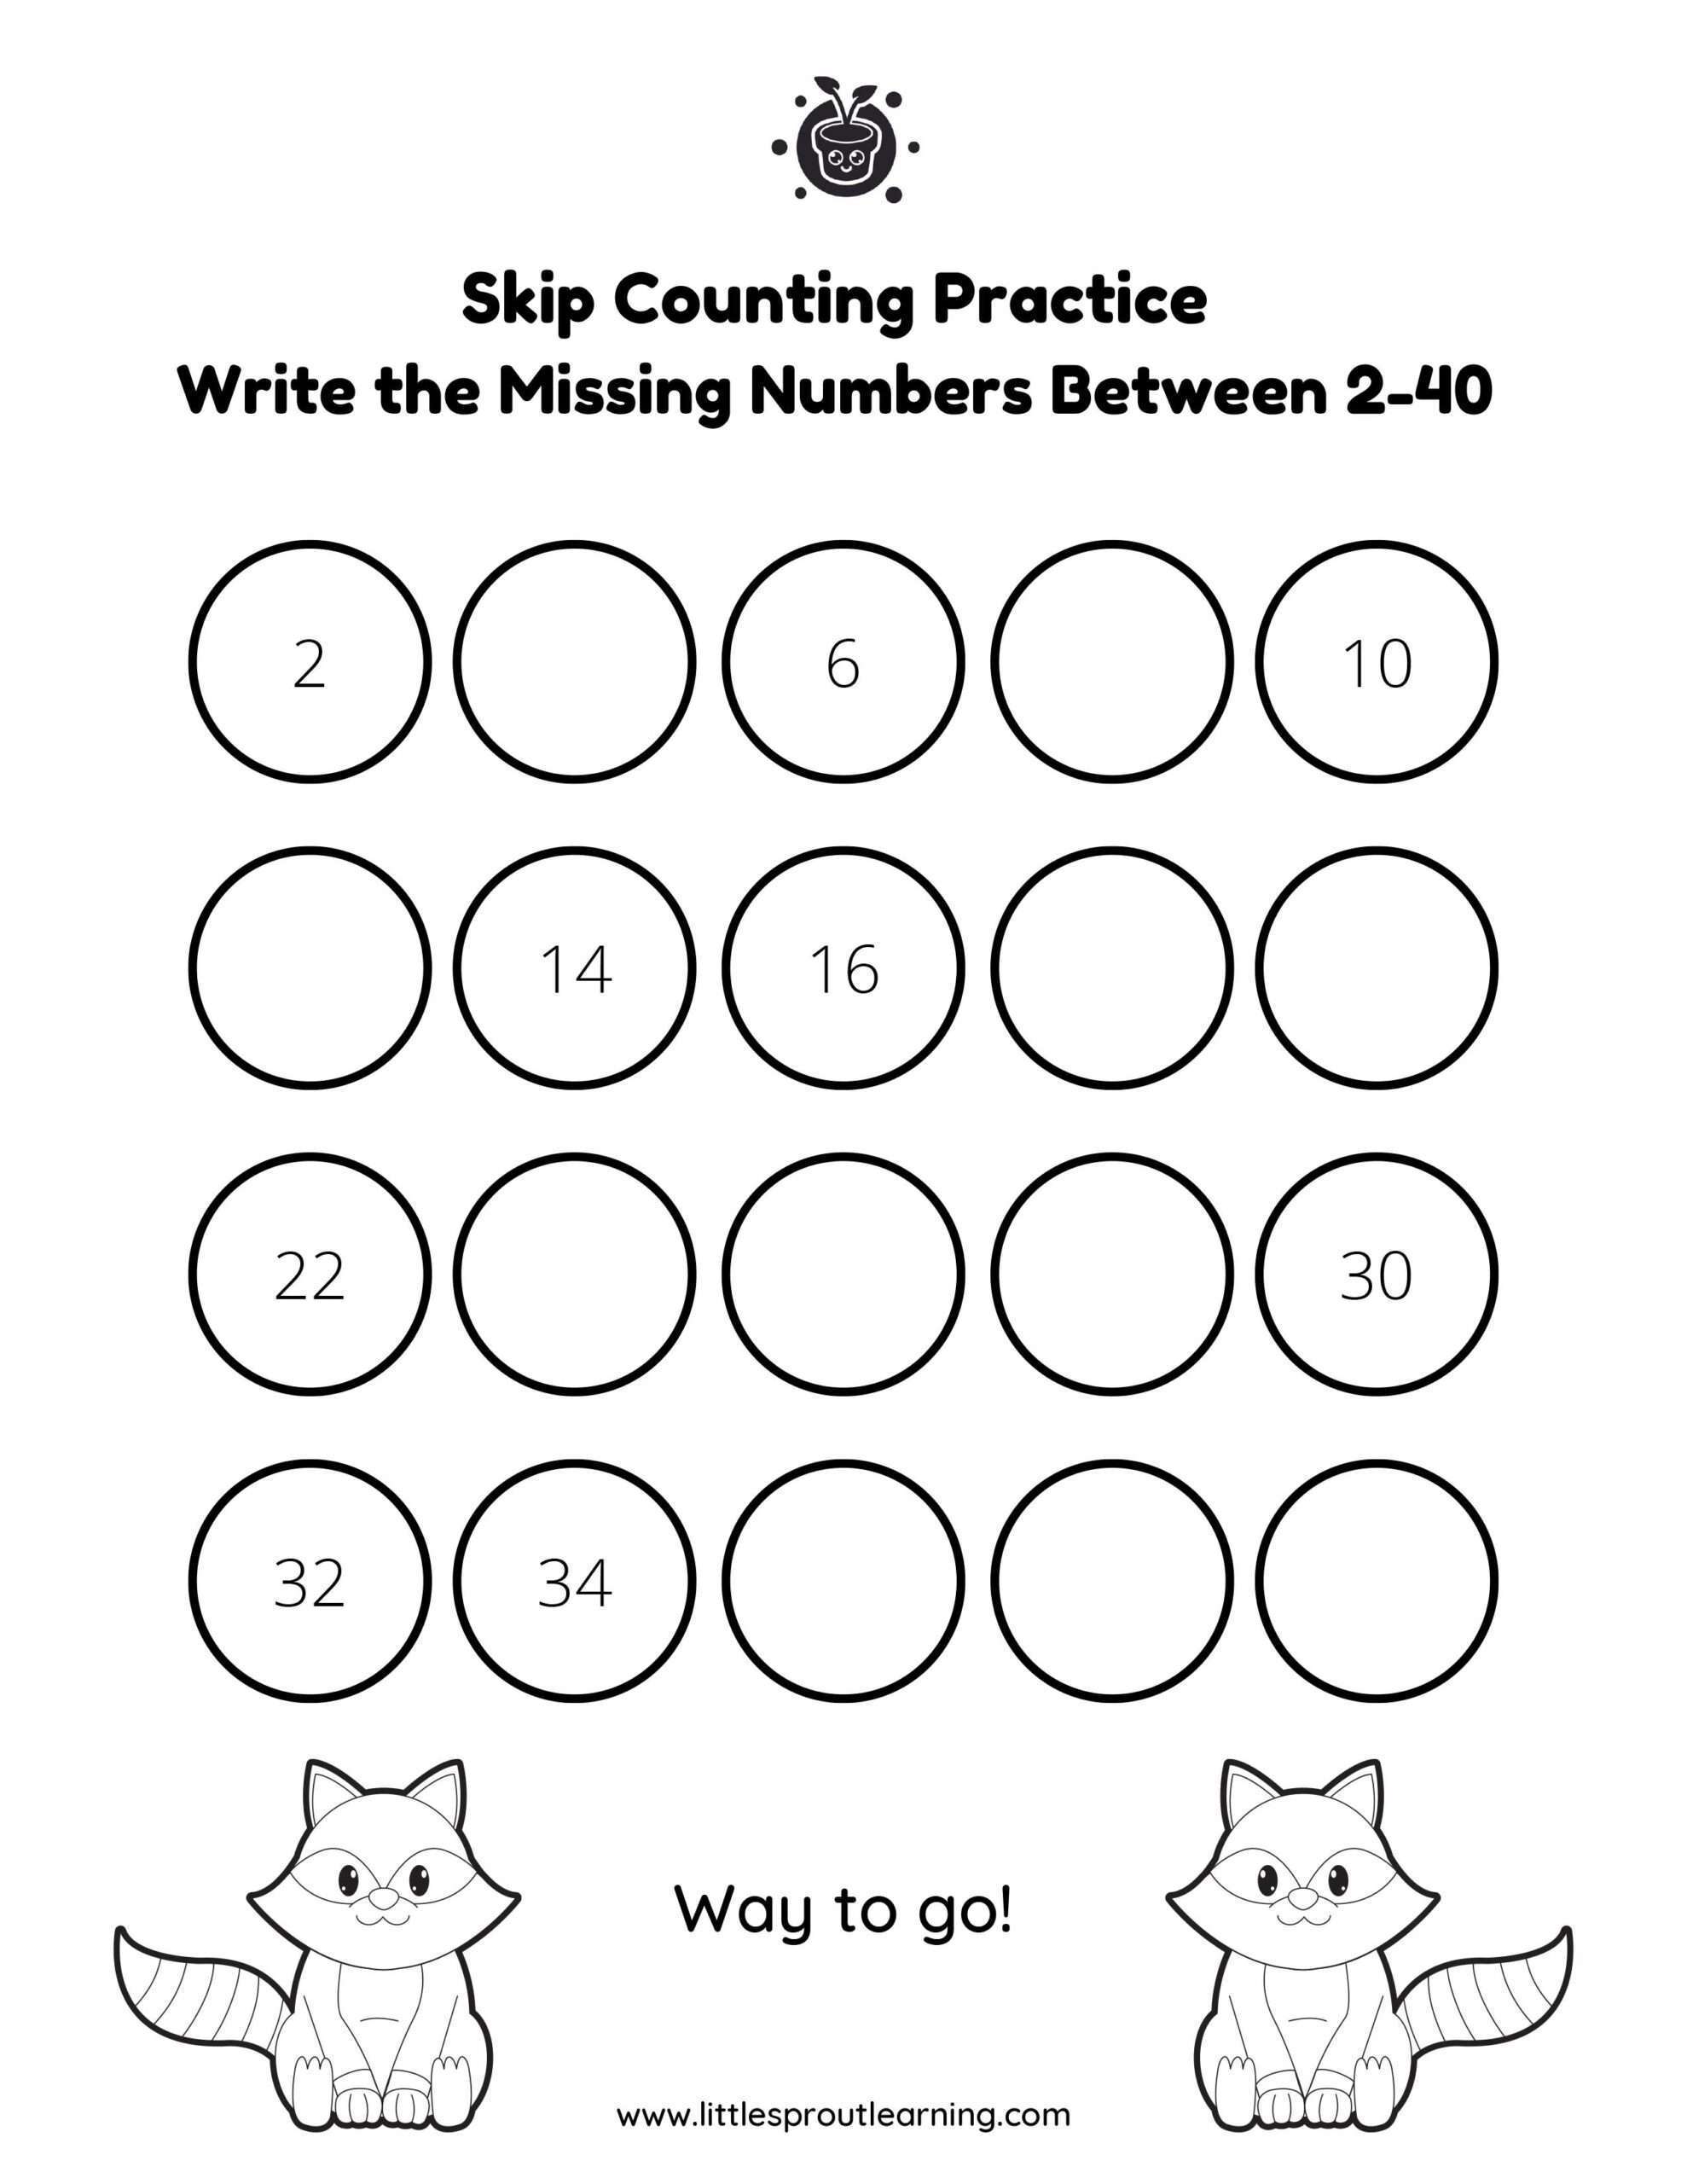 Kindergarten Counting Practice Worksheet Skip Counting by 2 2 scaled